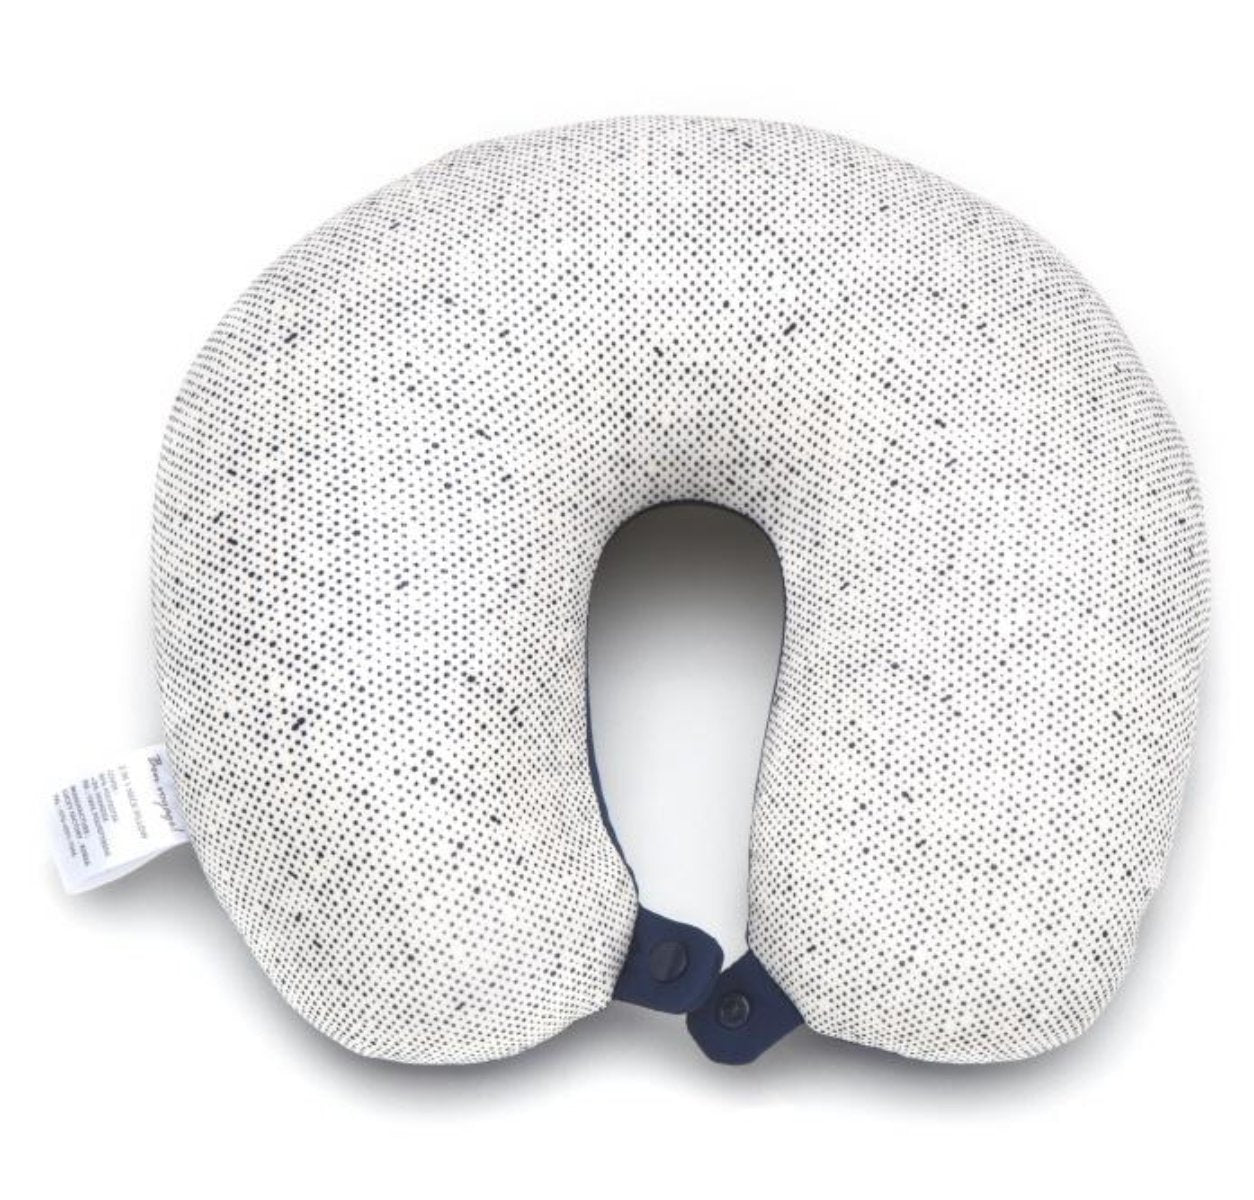 [Lucky Planet] Bon Voyage 2 in1 Travel Head Rest Neck Pillow _Whale - Luckyplanetusa